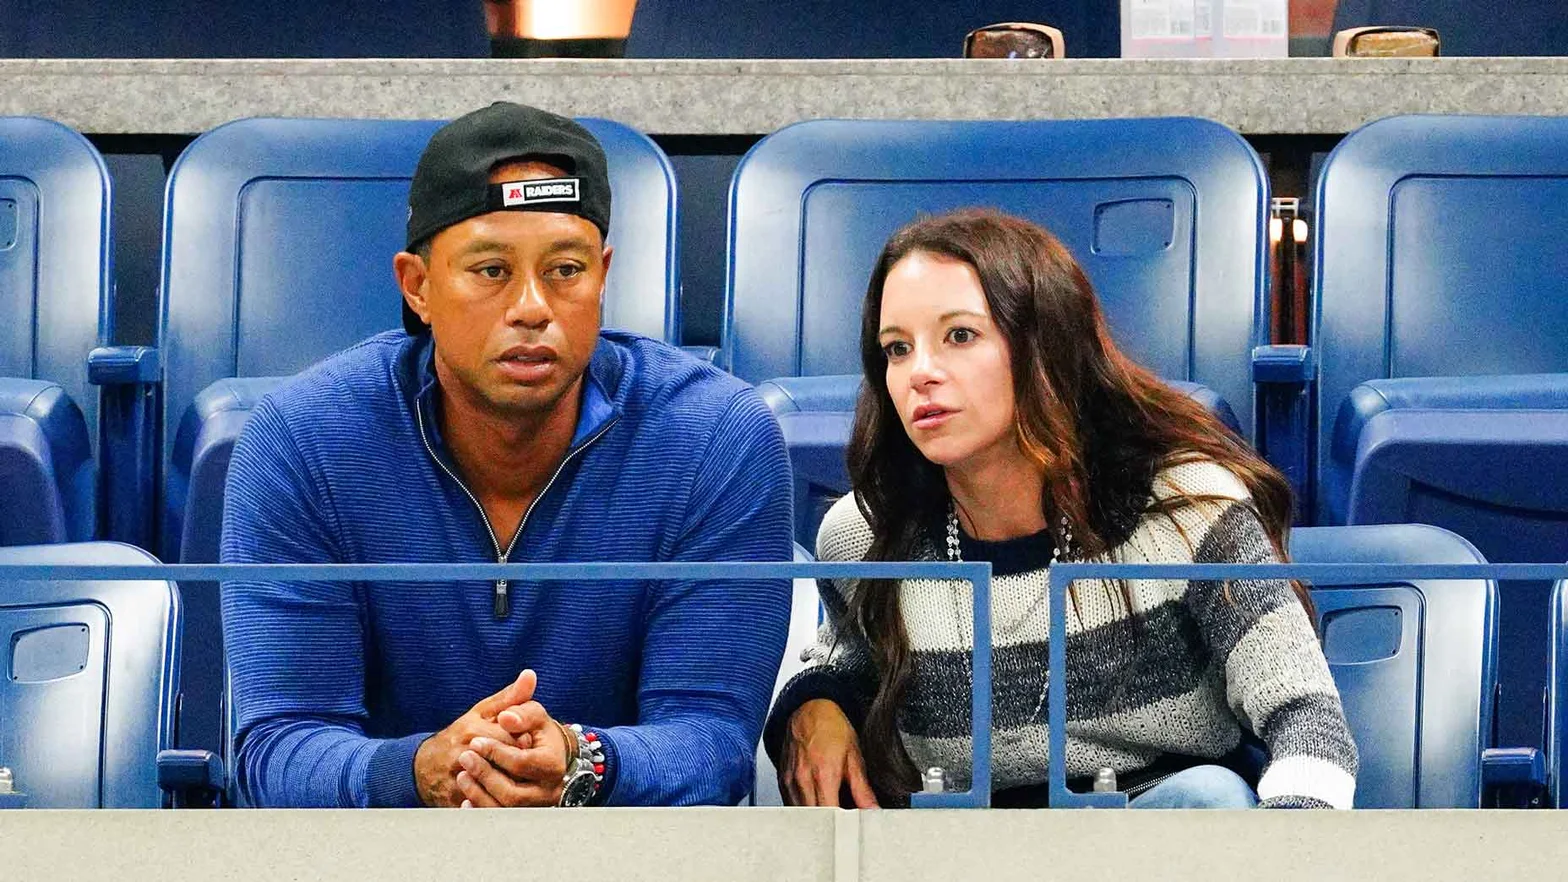 Tiger Woods' Ex-Girlfriend Takes Legal Action Over $8 Million Non-Disclosure Agreement